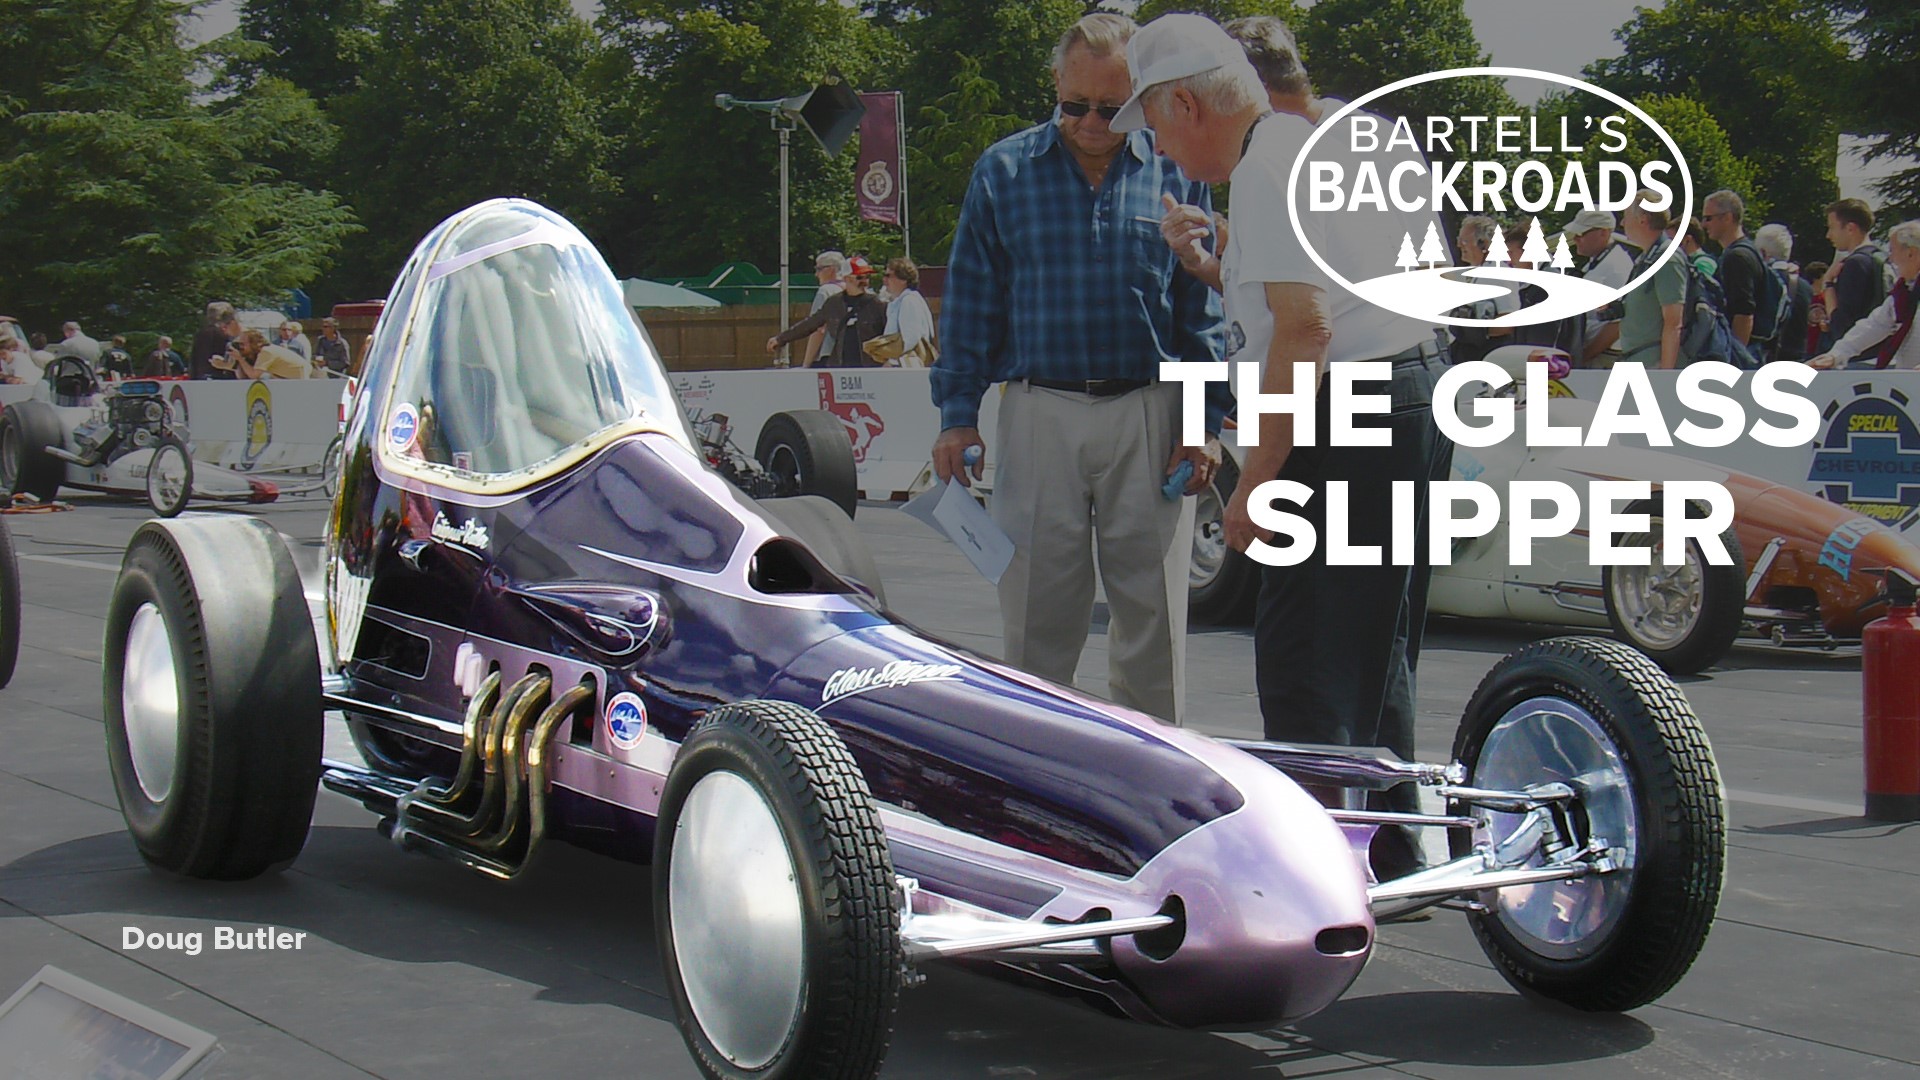 Back in the '50s, two brothers from Sacramento built a ground breaking dragster when they were just out of high school. John Bartell learns what it was like to create a record setting icon.